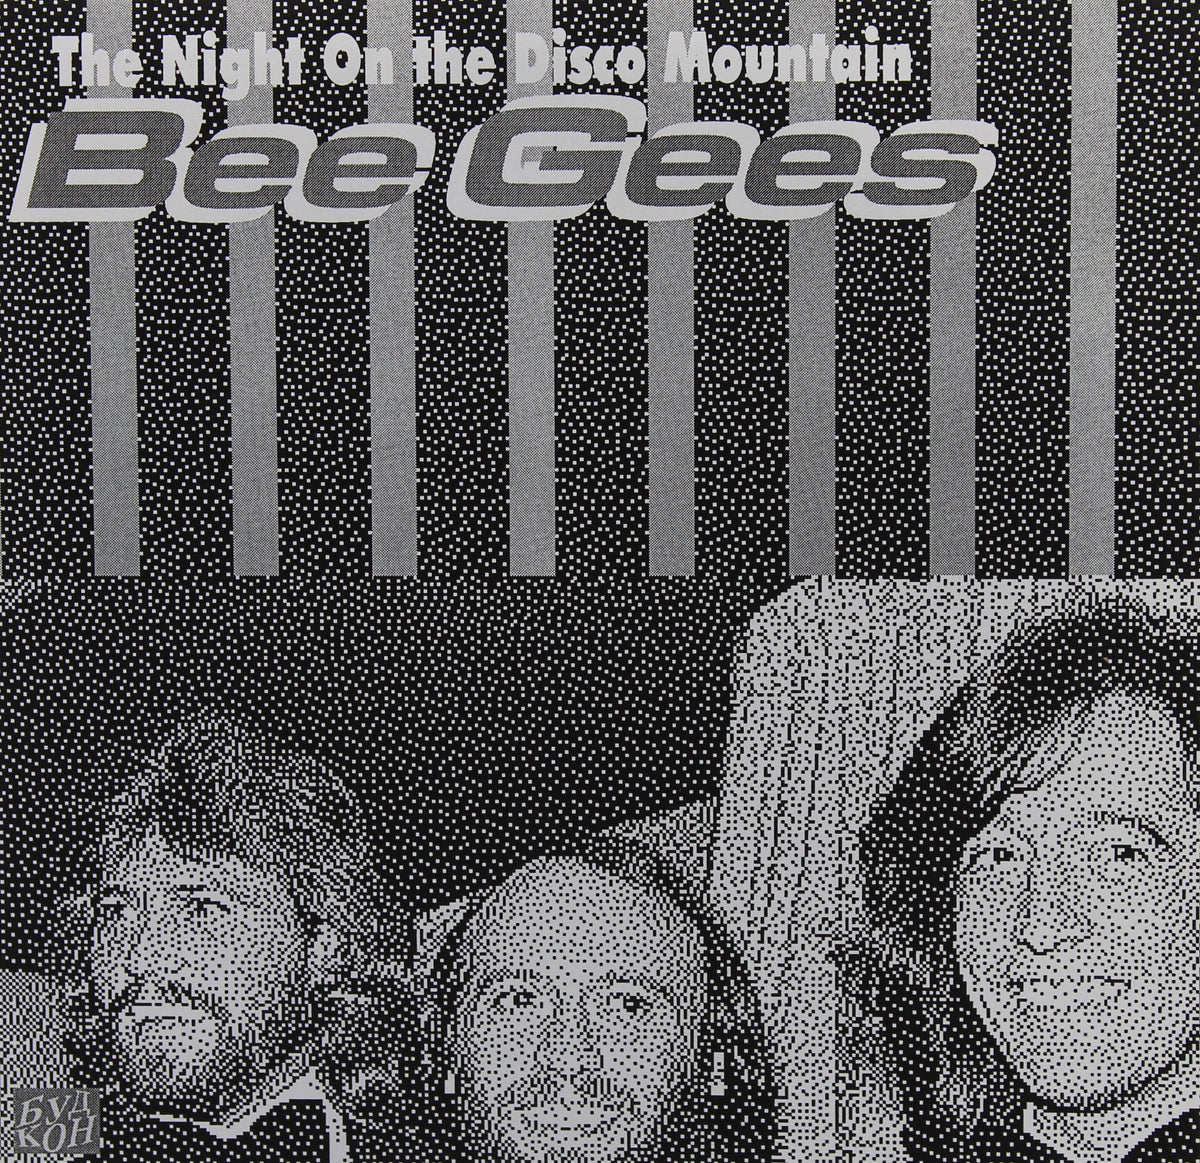 Bee Gees - The Night On Disco Mountain, Flexi-disc, 5½&quot;, 45 RPM, Single Sided, Unofficial Release, Russia